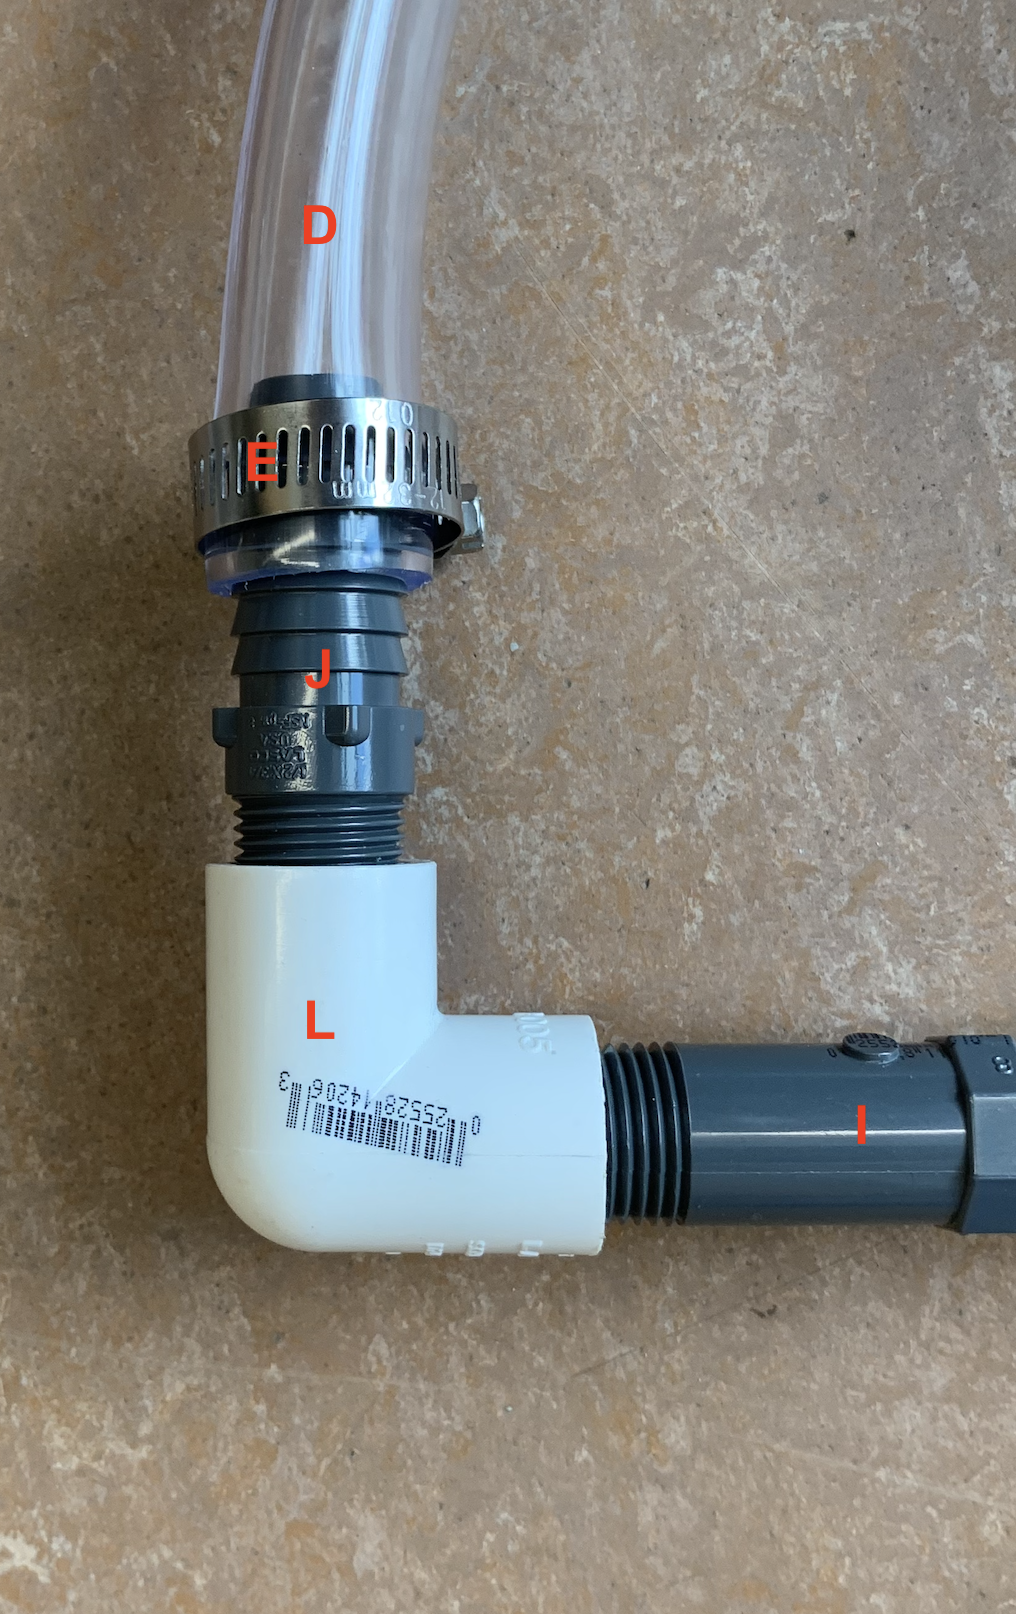 mag pump connection to manifold